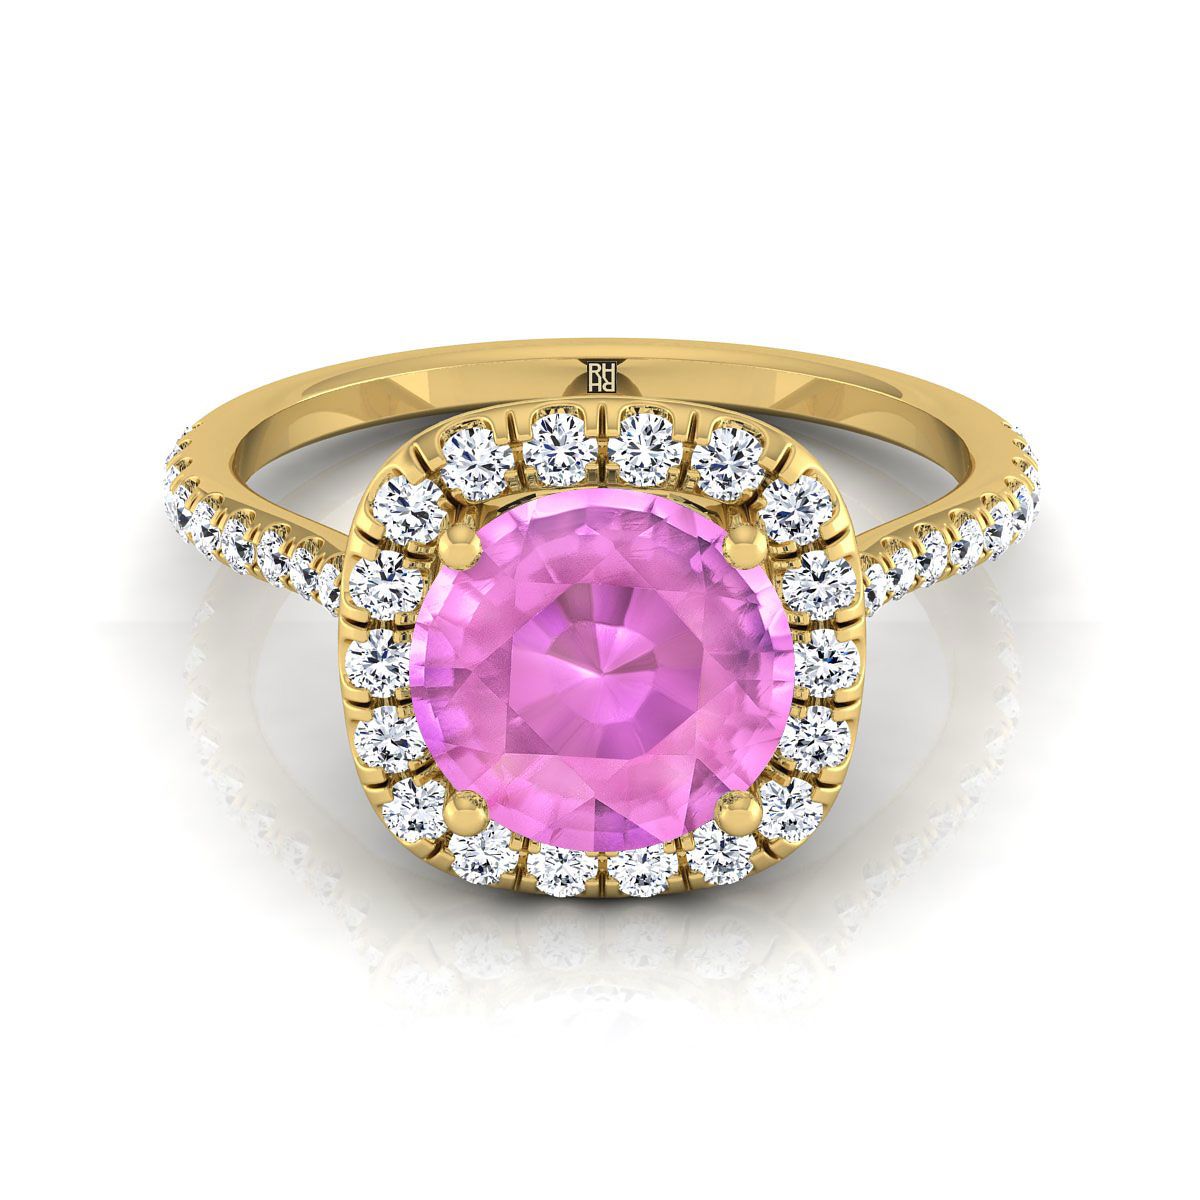 14K Yellow Gold Round Brilliant Pink Sapphire Shared Prong Diamond Halo Engagement Ring -3/8ctw